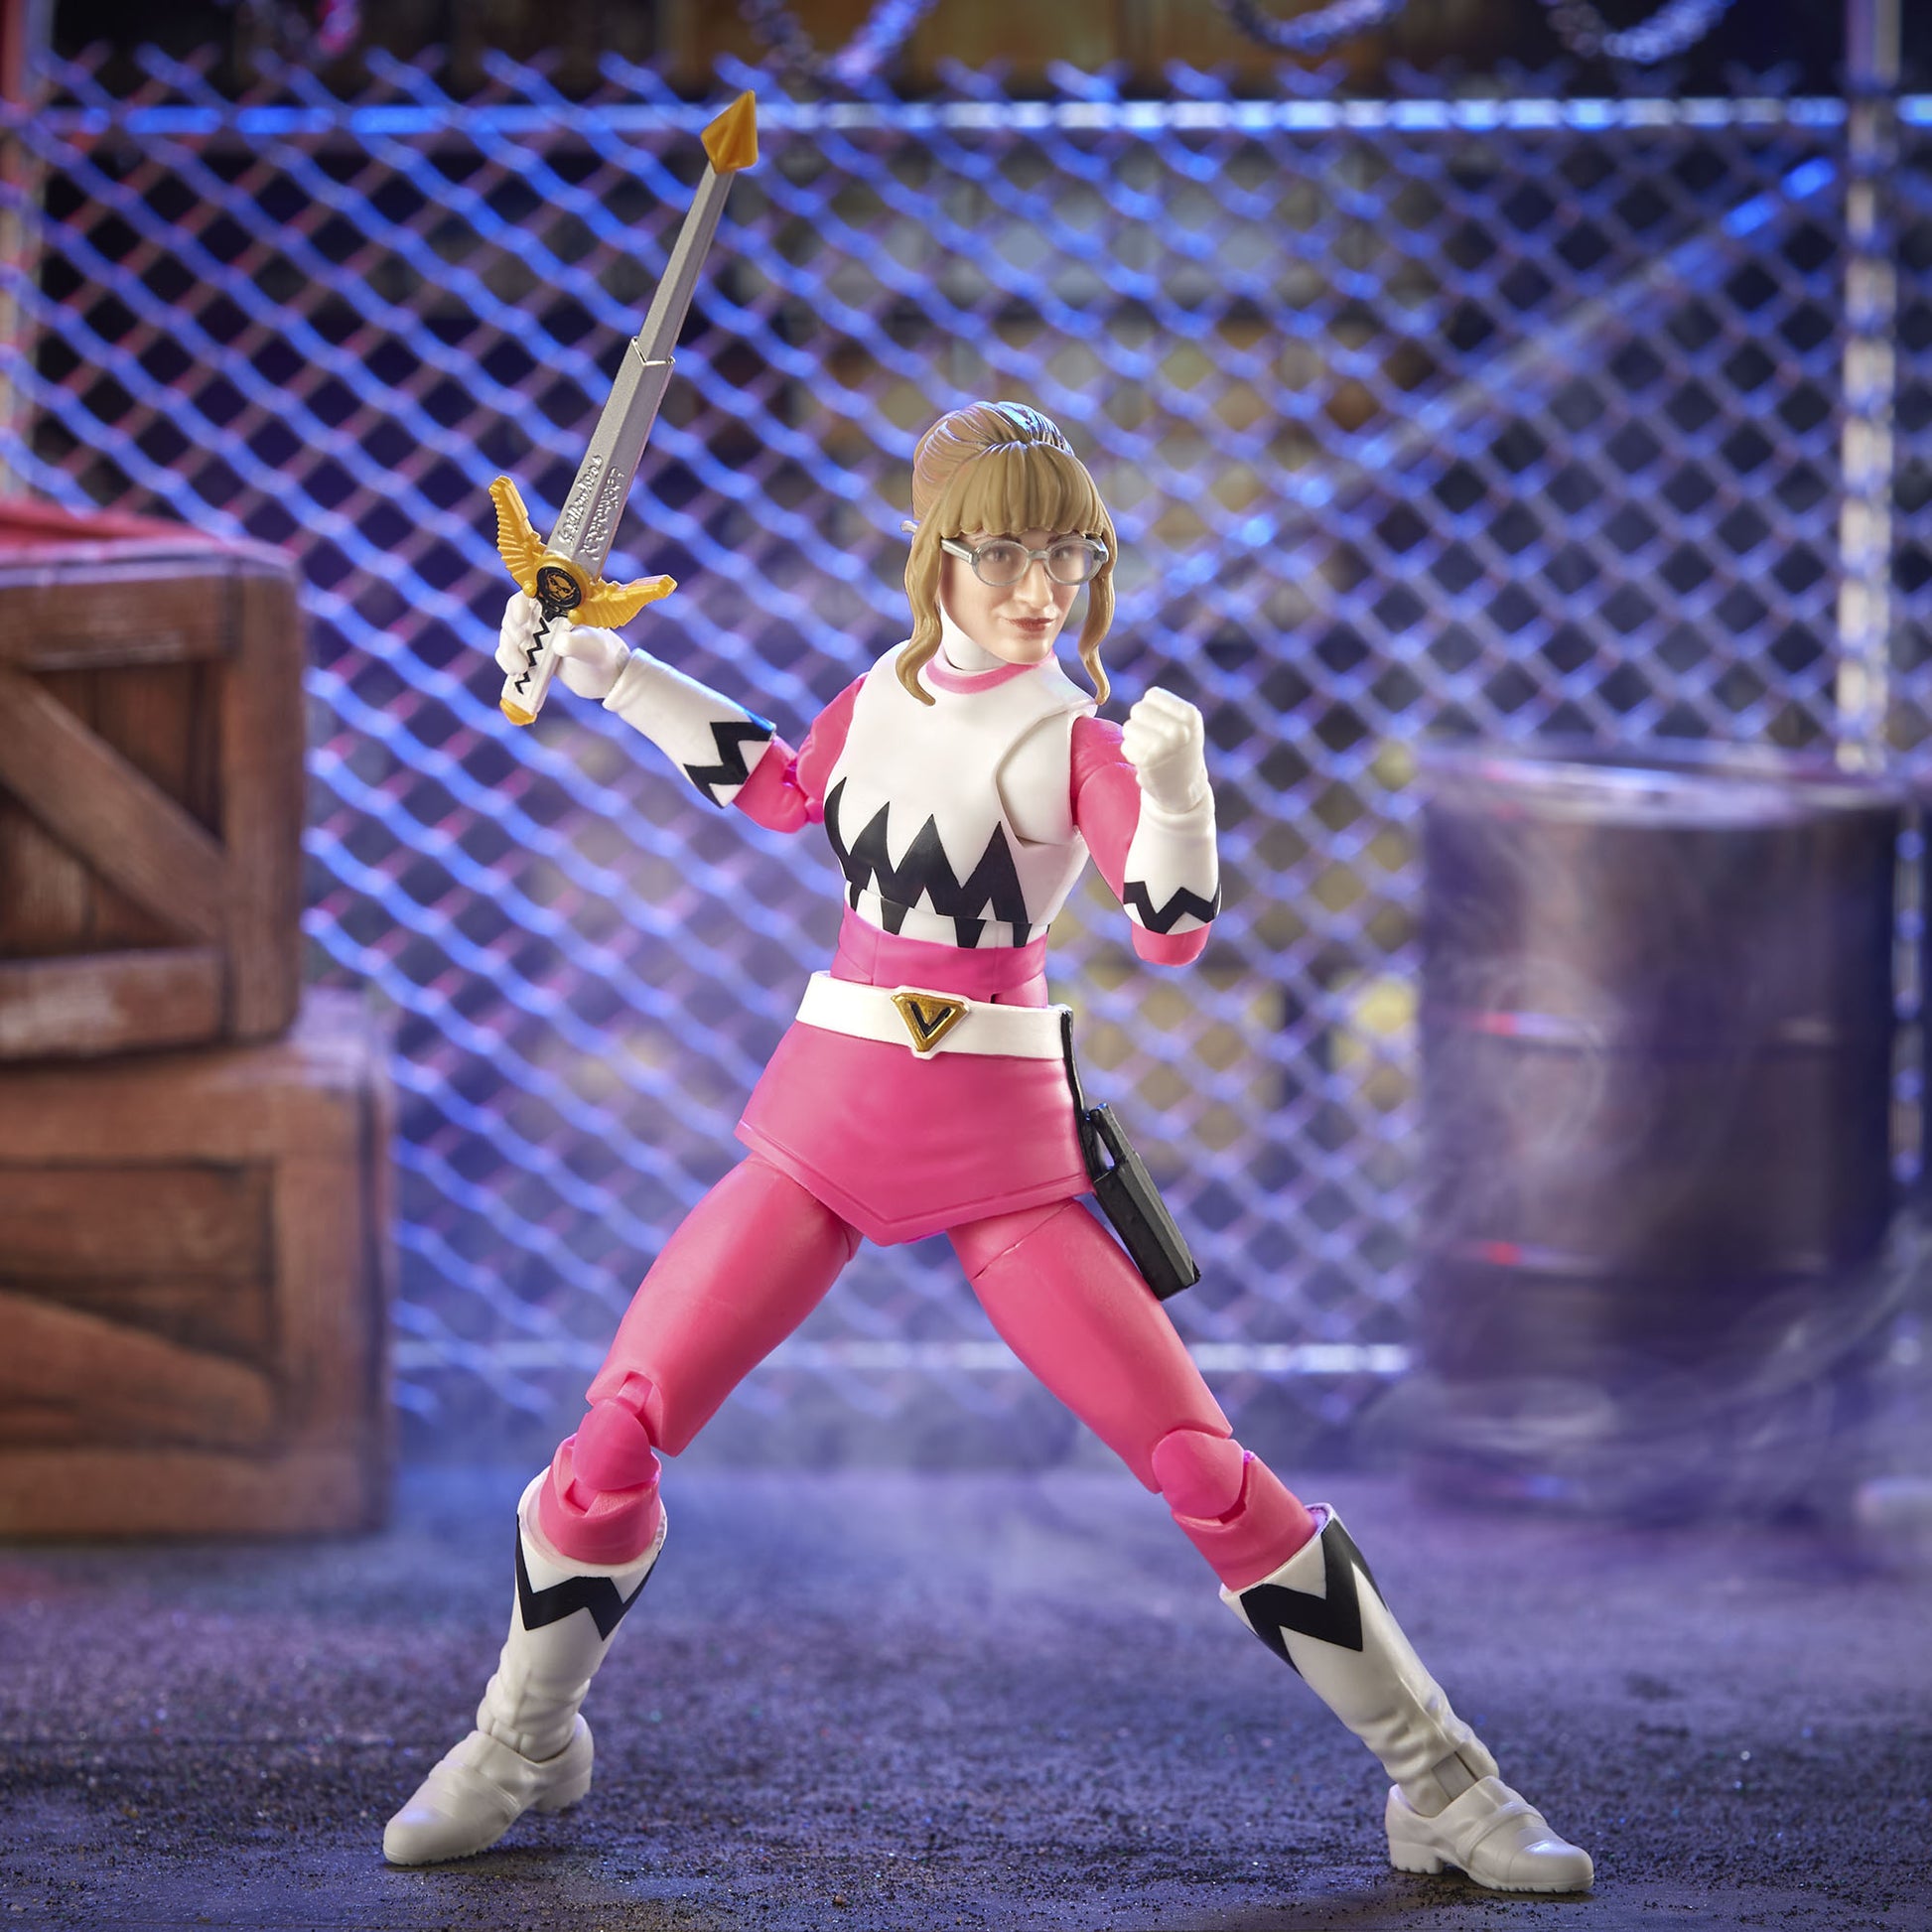 Power Rangers Lightning Collection Lost Galaxy Pink Ranger Figure Toy split pose - Heretoserveyou